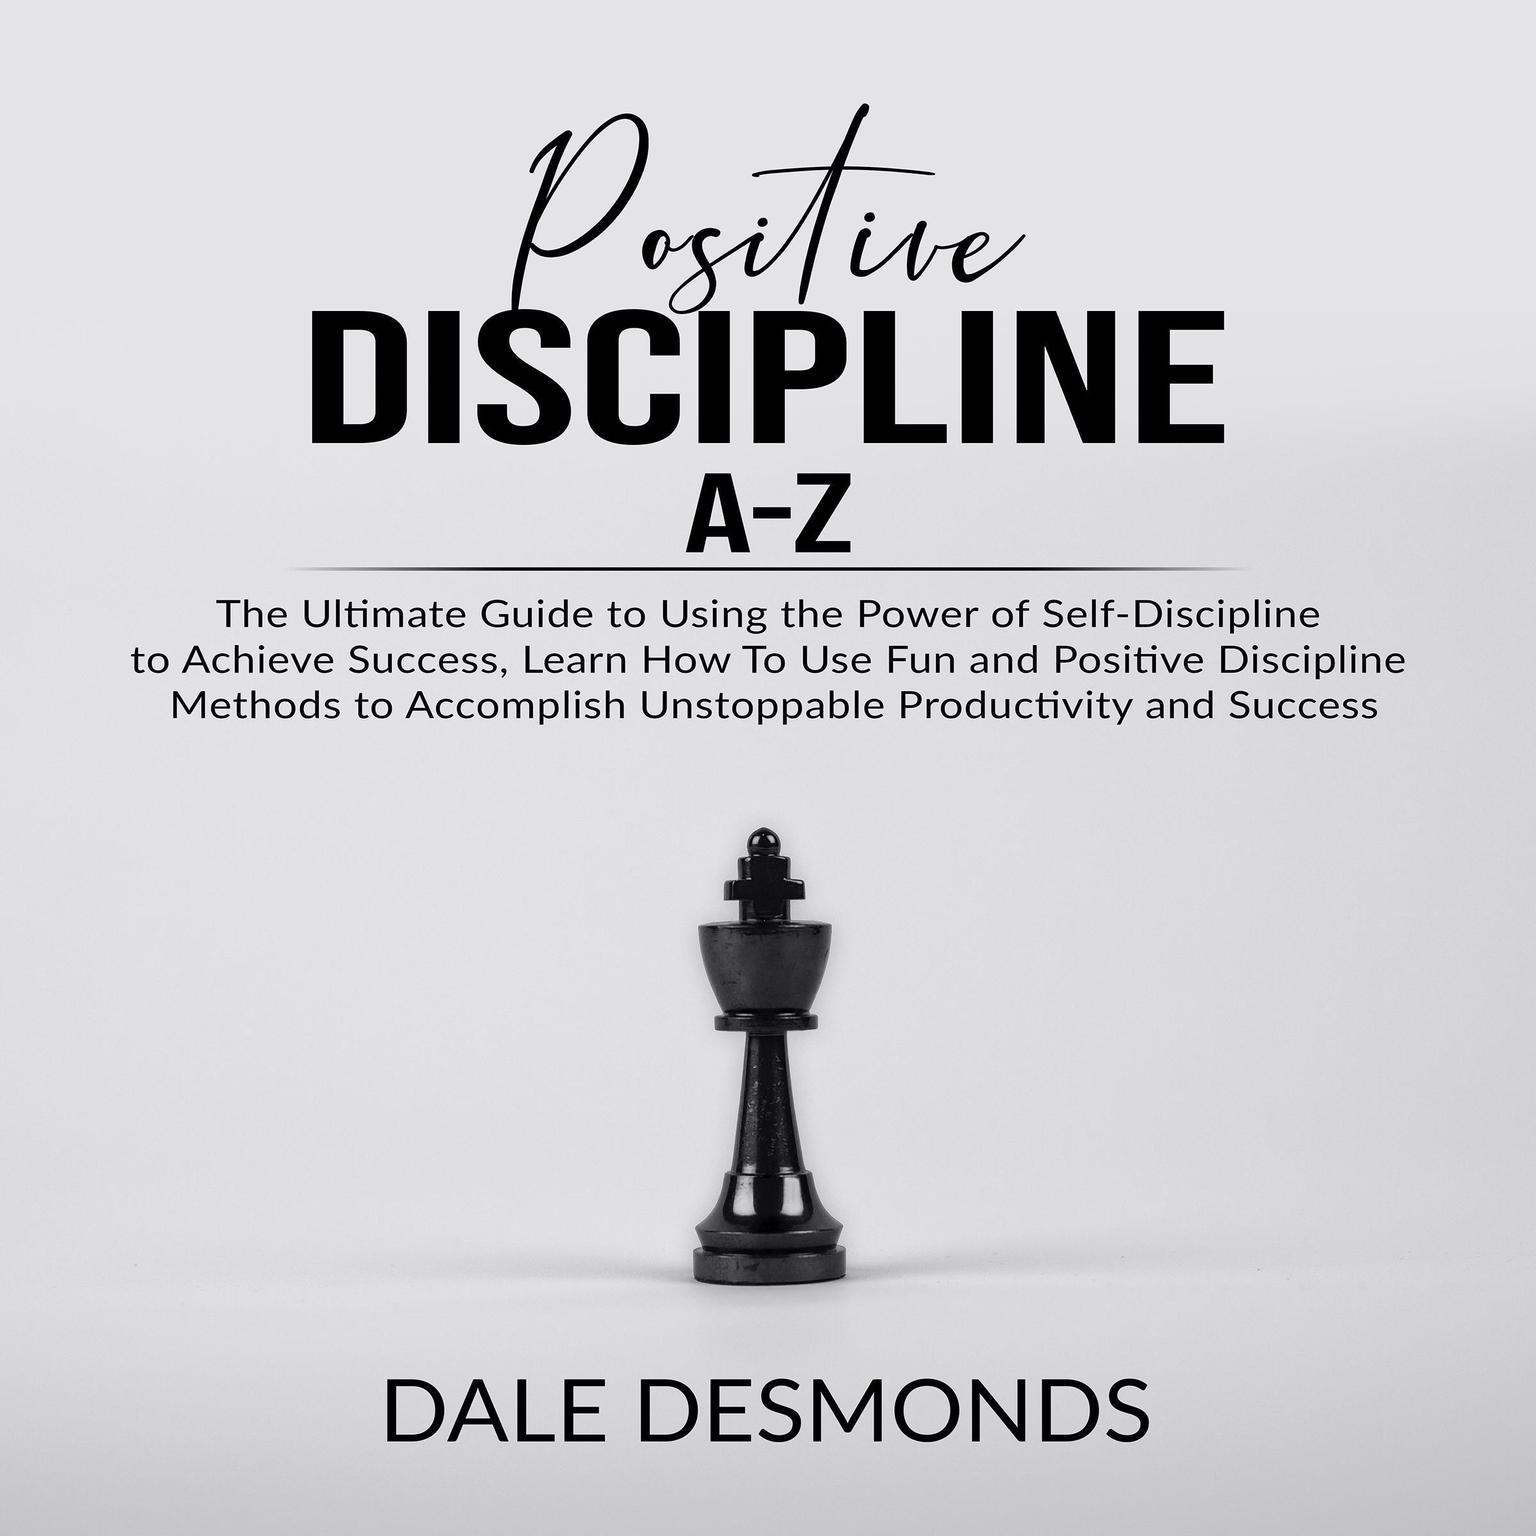 Positive Discipline A-Z: The Ultimate Guide to Using the Power of Self- Discipline to Achieve Success, Learn How To Use Fun and Positive Discipline Methods to Accomplish Unstoppable Productivity and Success Audiobook, by Dale Desmonds